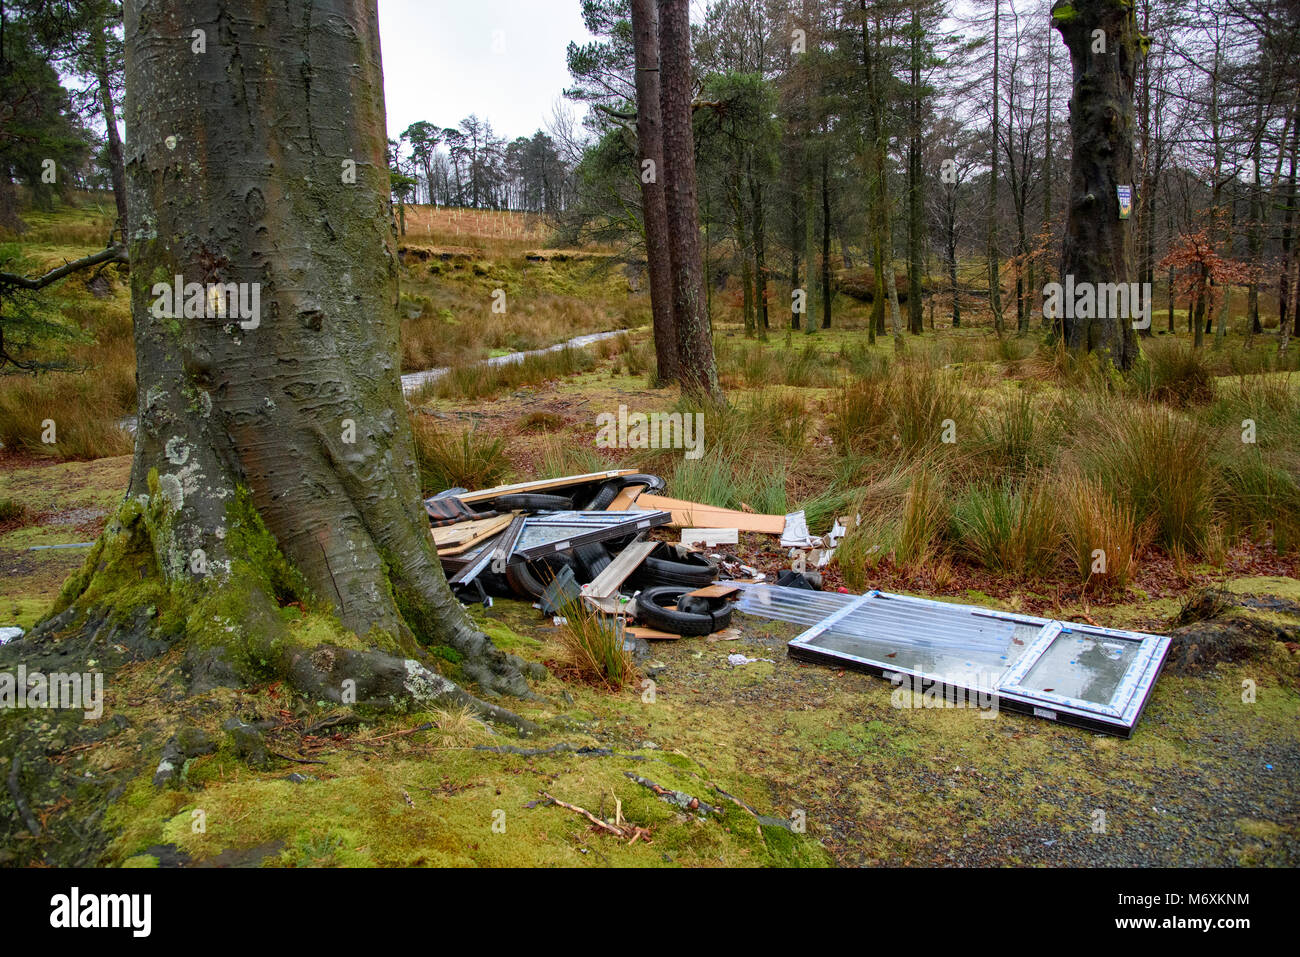 Fly tipping in an Area of Outstanding Natural Beauty. Rubbish dumped in the Forest of Bowland, Marshaw, Lancaster, Lancashire, United Kingdom Stock Photo